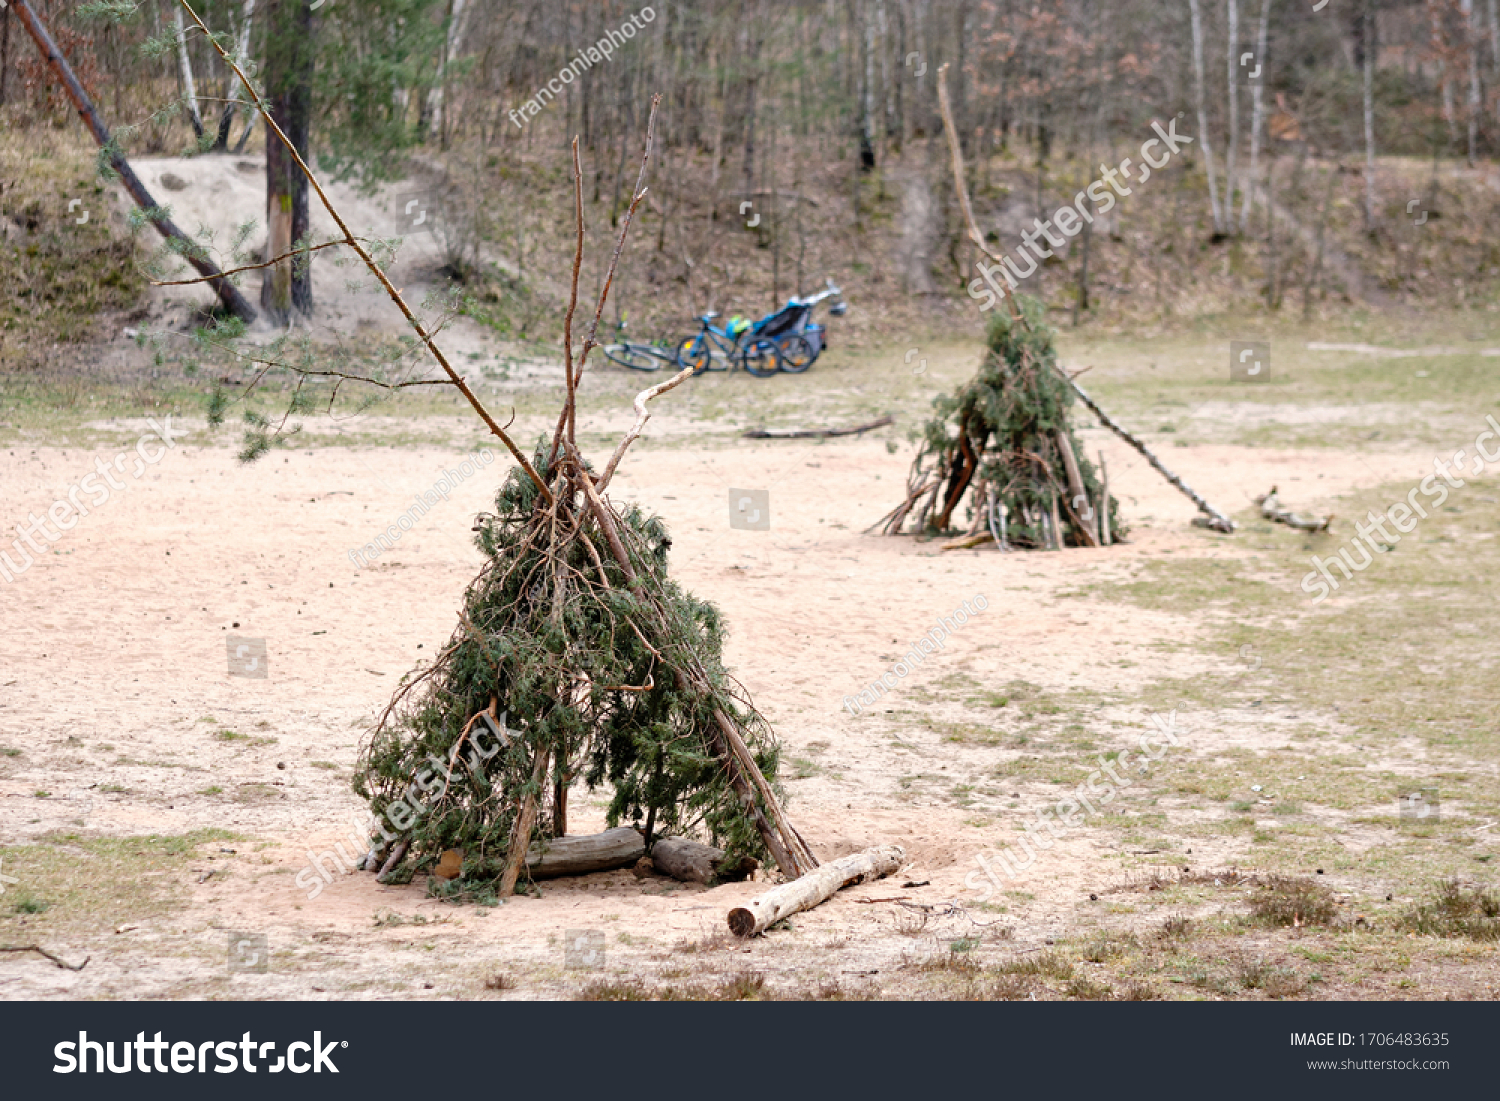 Two tepees built with twigs and branches of conifers standing on sandy ground in the forest with bicycles in the background Seen in Germany in April. #1706483635